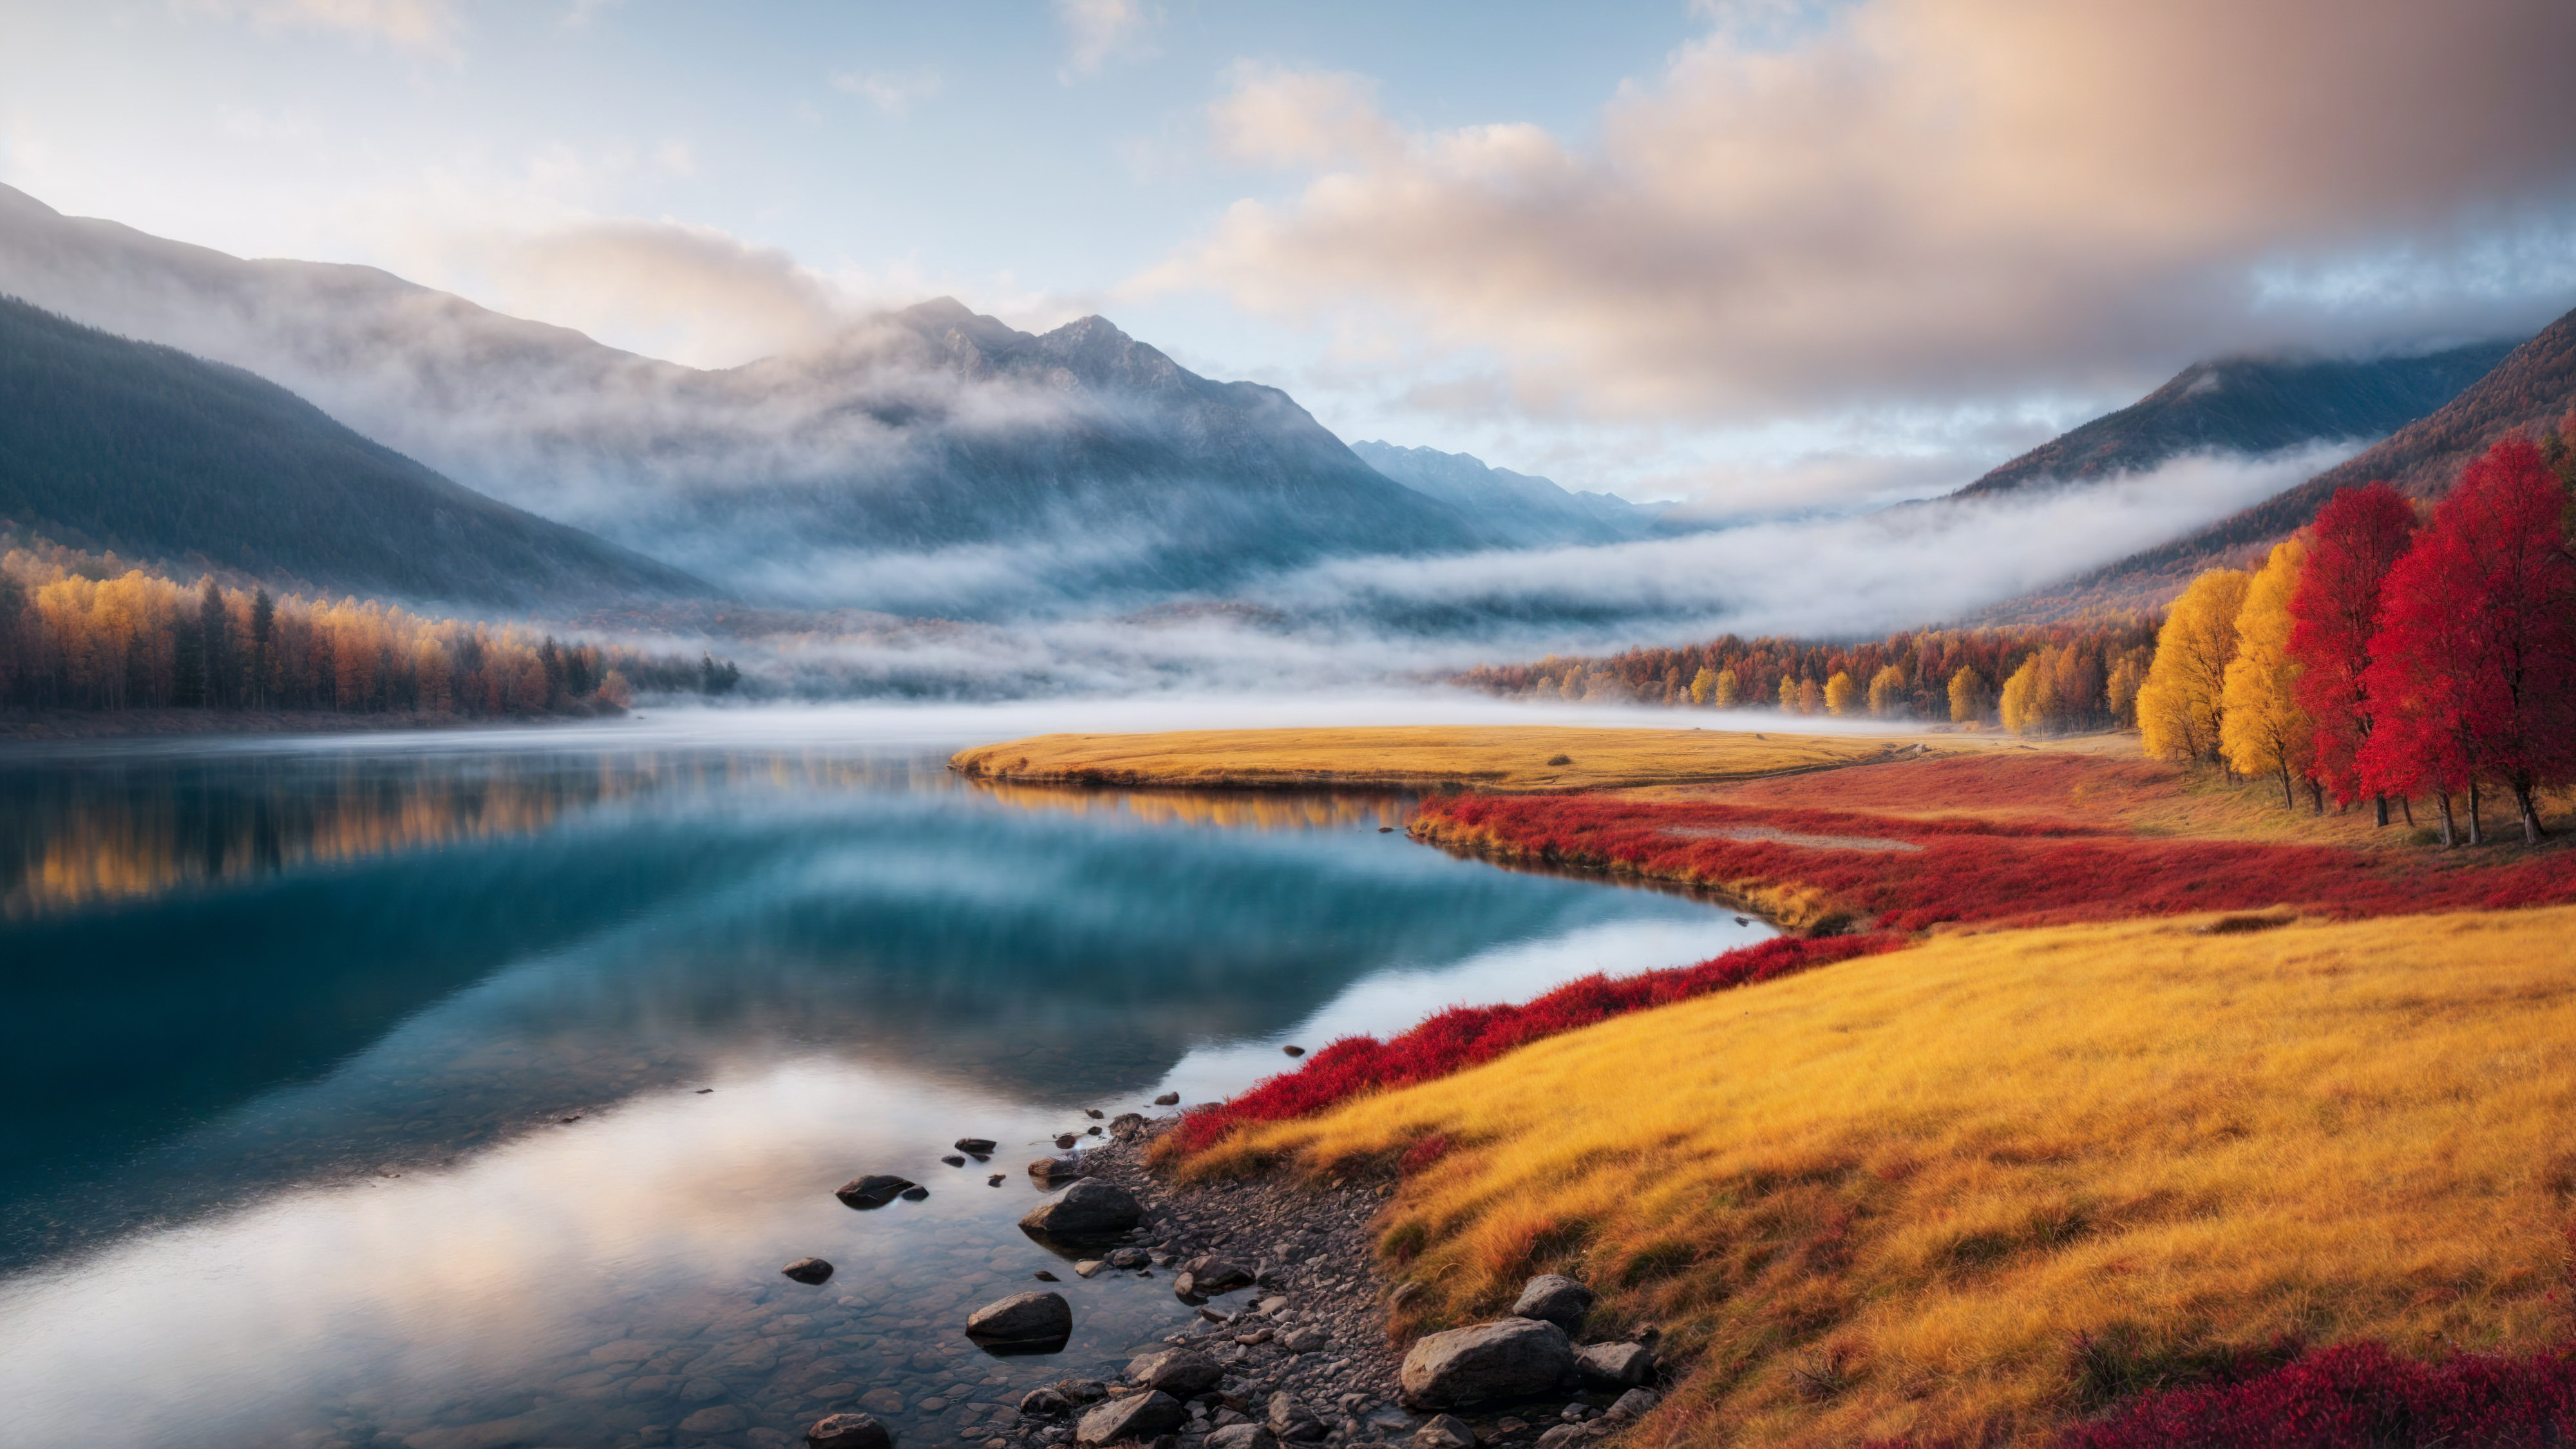 Download this scenery wallpaper that beautifully captures a colorful autumn landscape of the mountains, with yellow and red trees surrounding a misty lake.